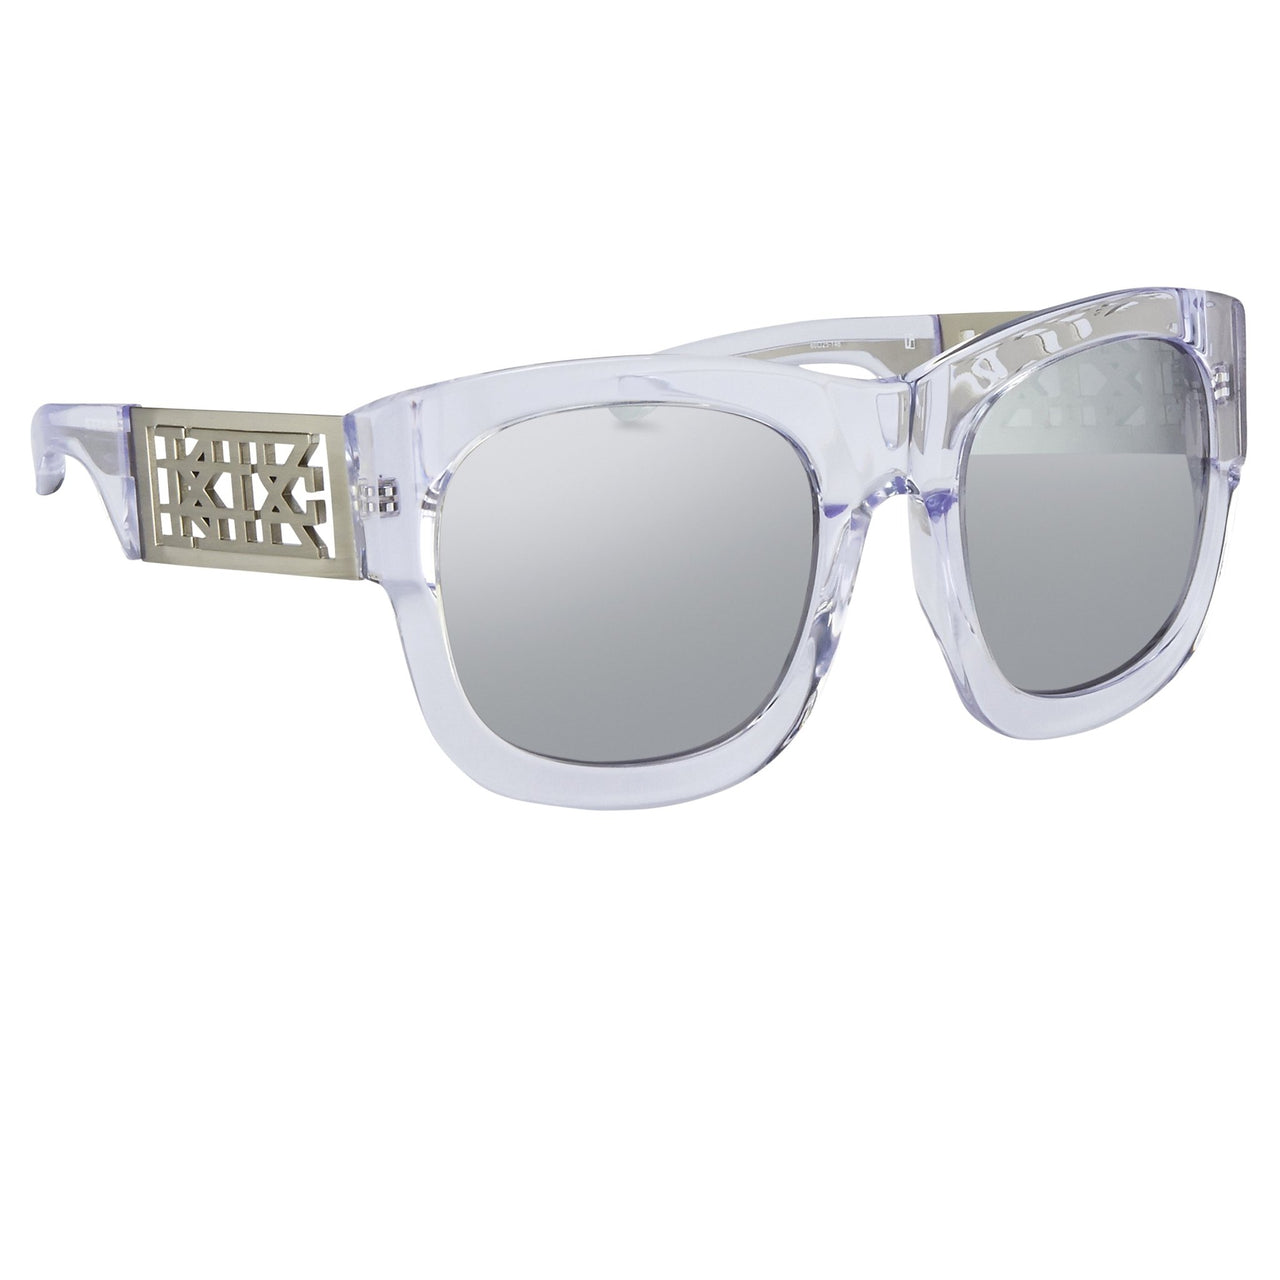 Kokon To Zai Sunglasses Oversized Clear With Silver Category 3 Mirror Lenses KTZ17C3SUN - Watches & Crystals